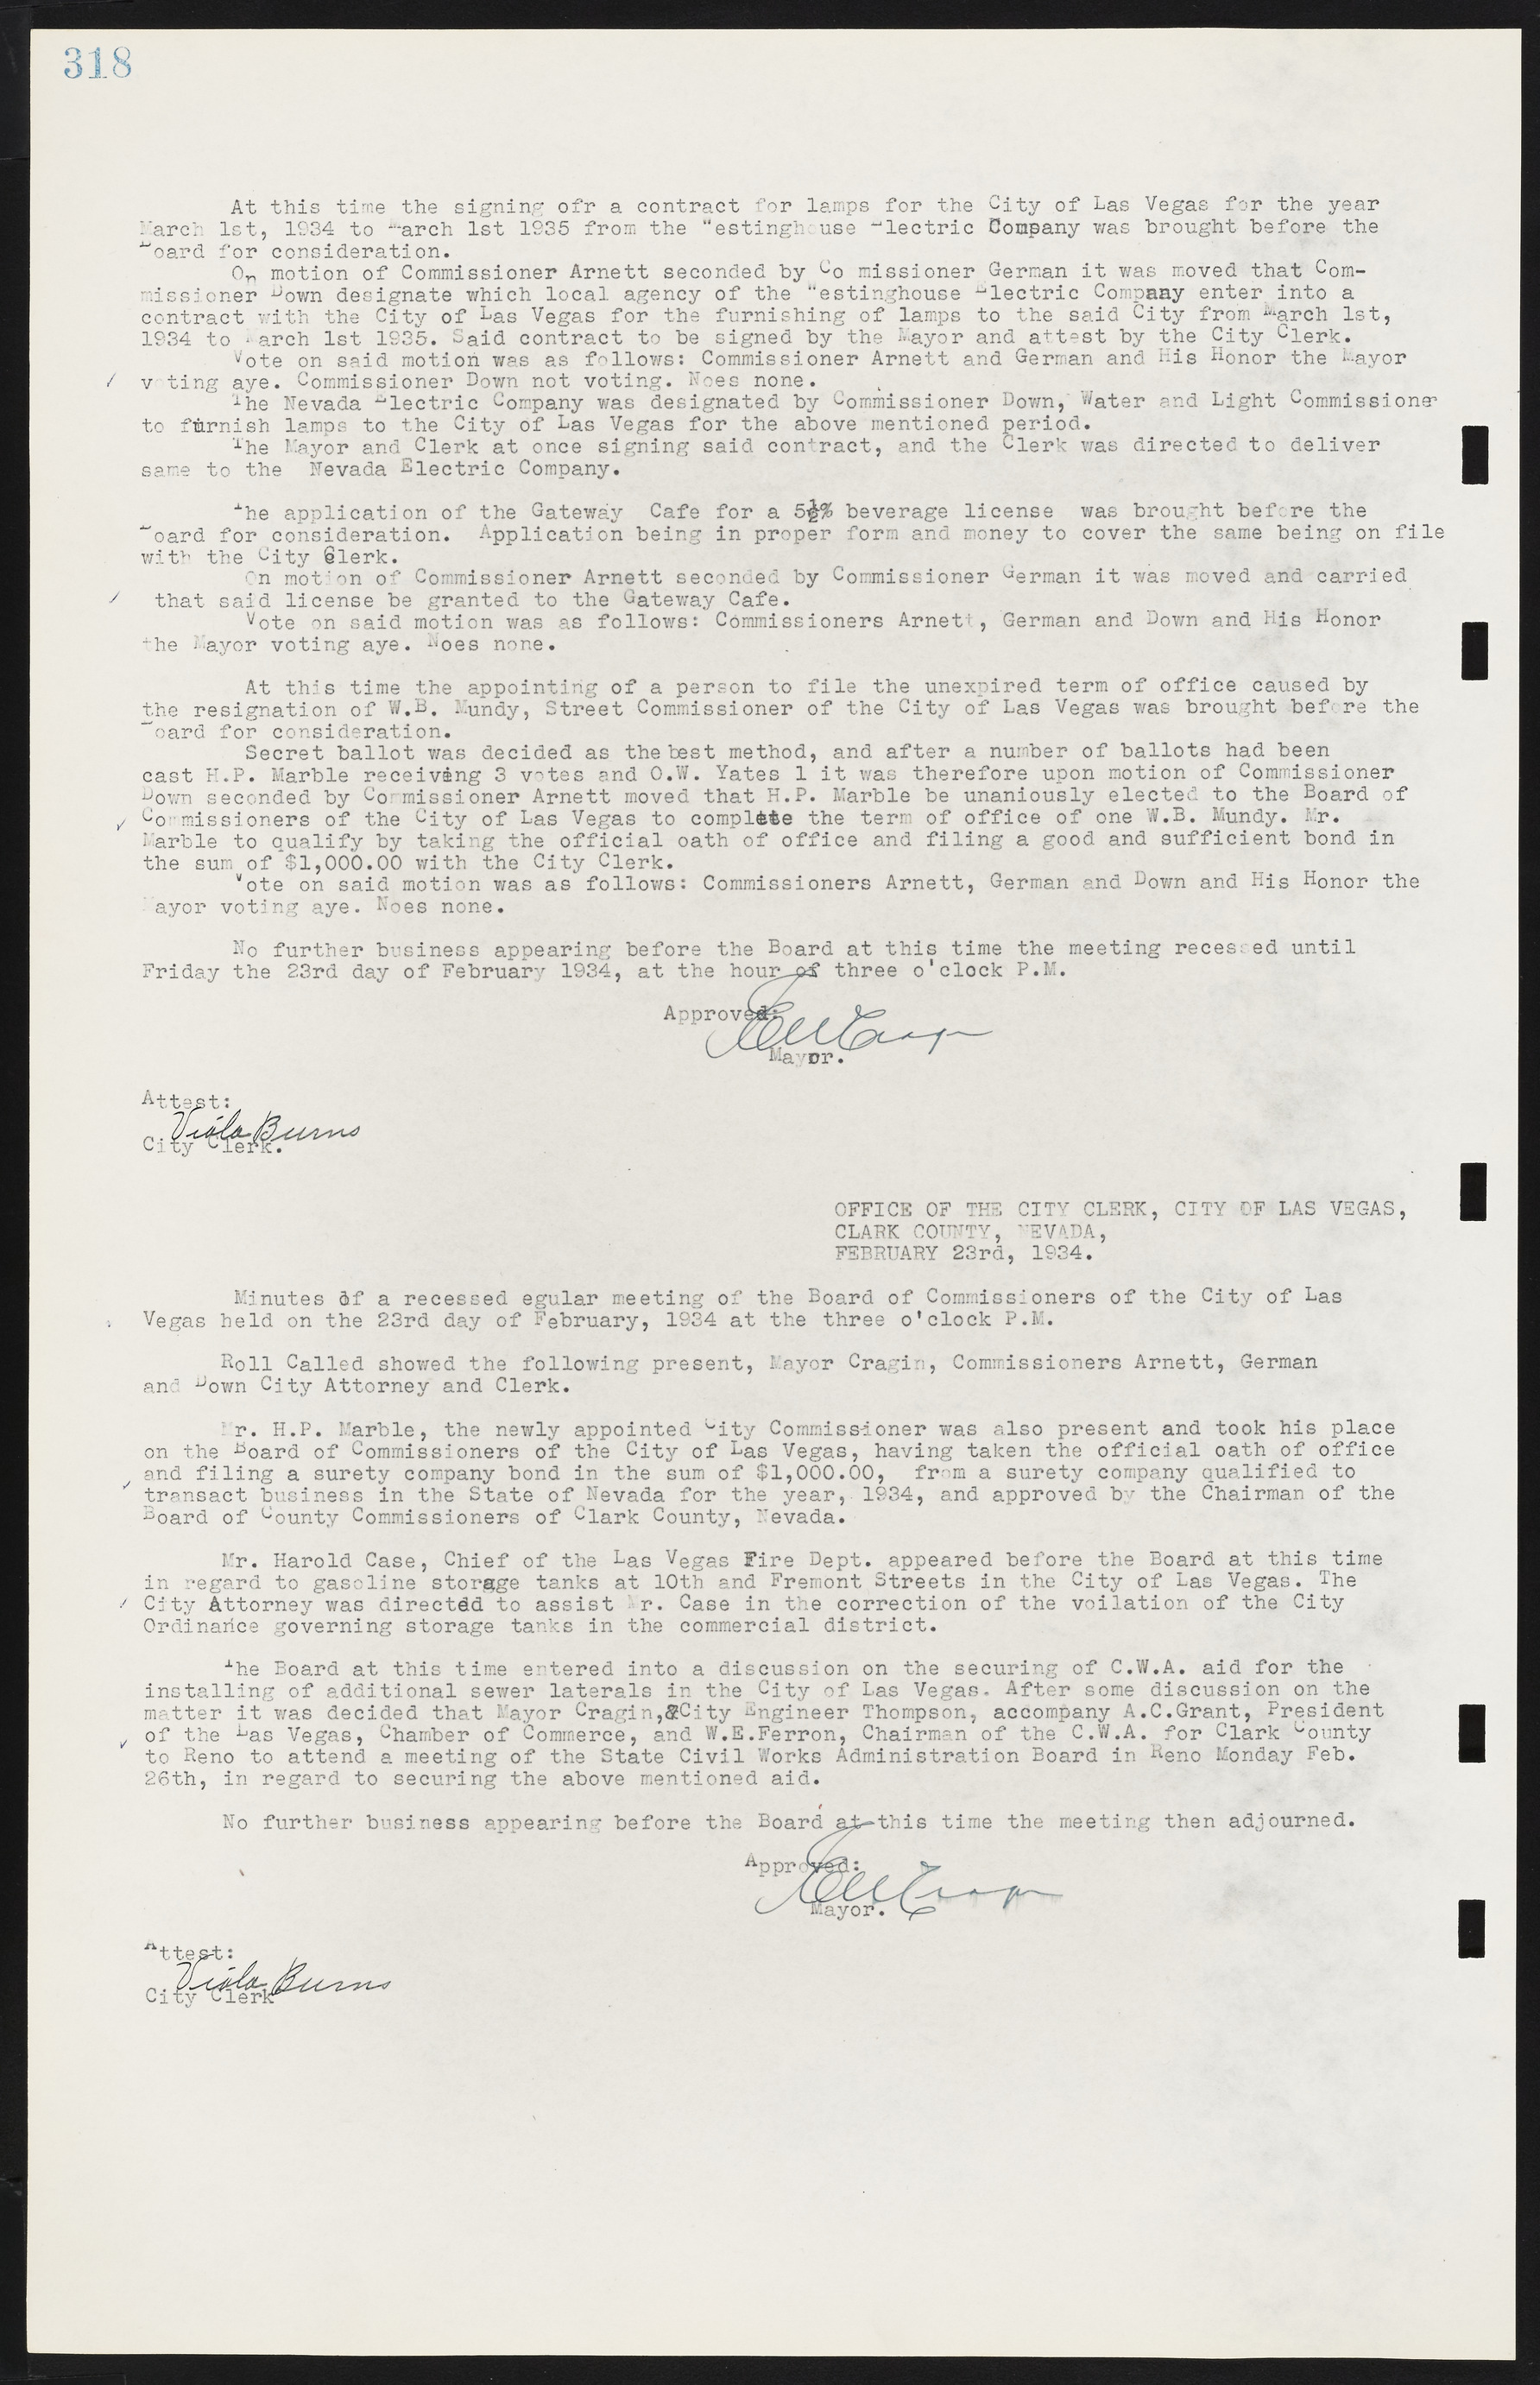 Las Vegas City Commission Minutes, May 14, 1929 to February 11, 1937, lvc000003-325